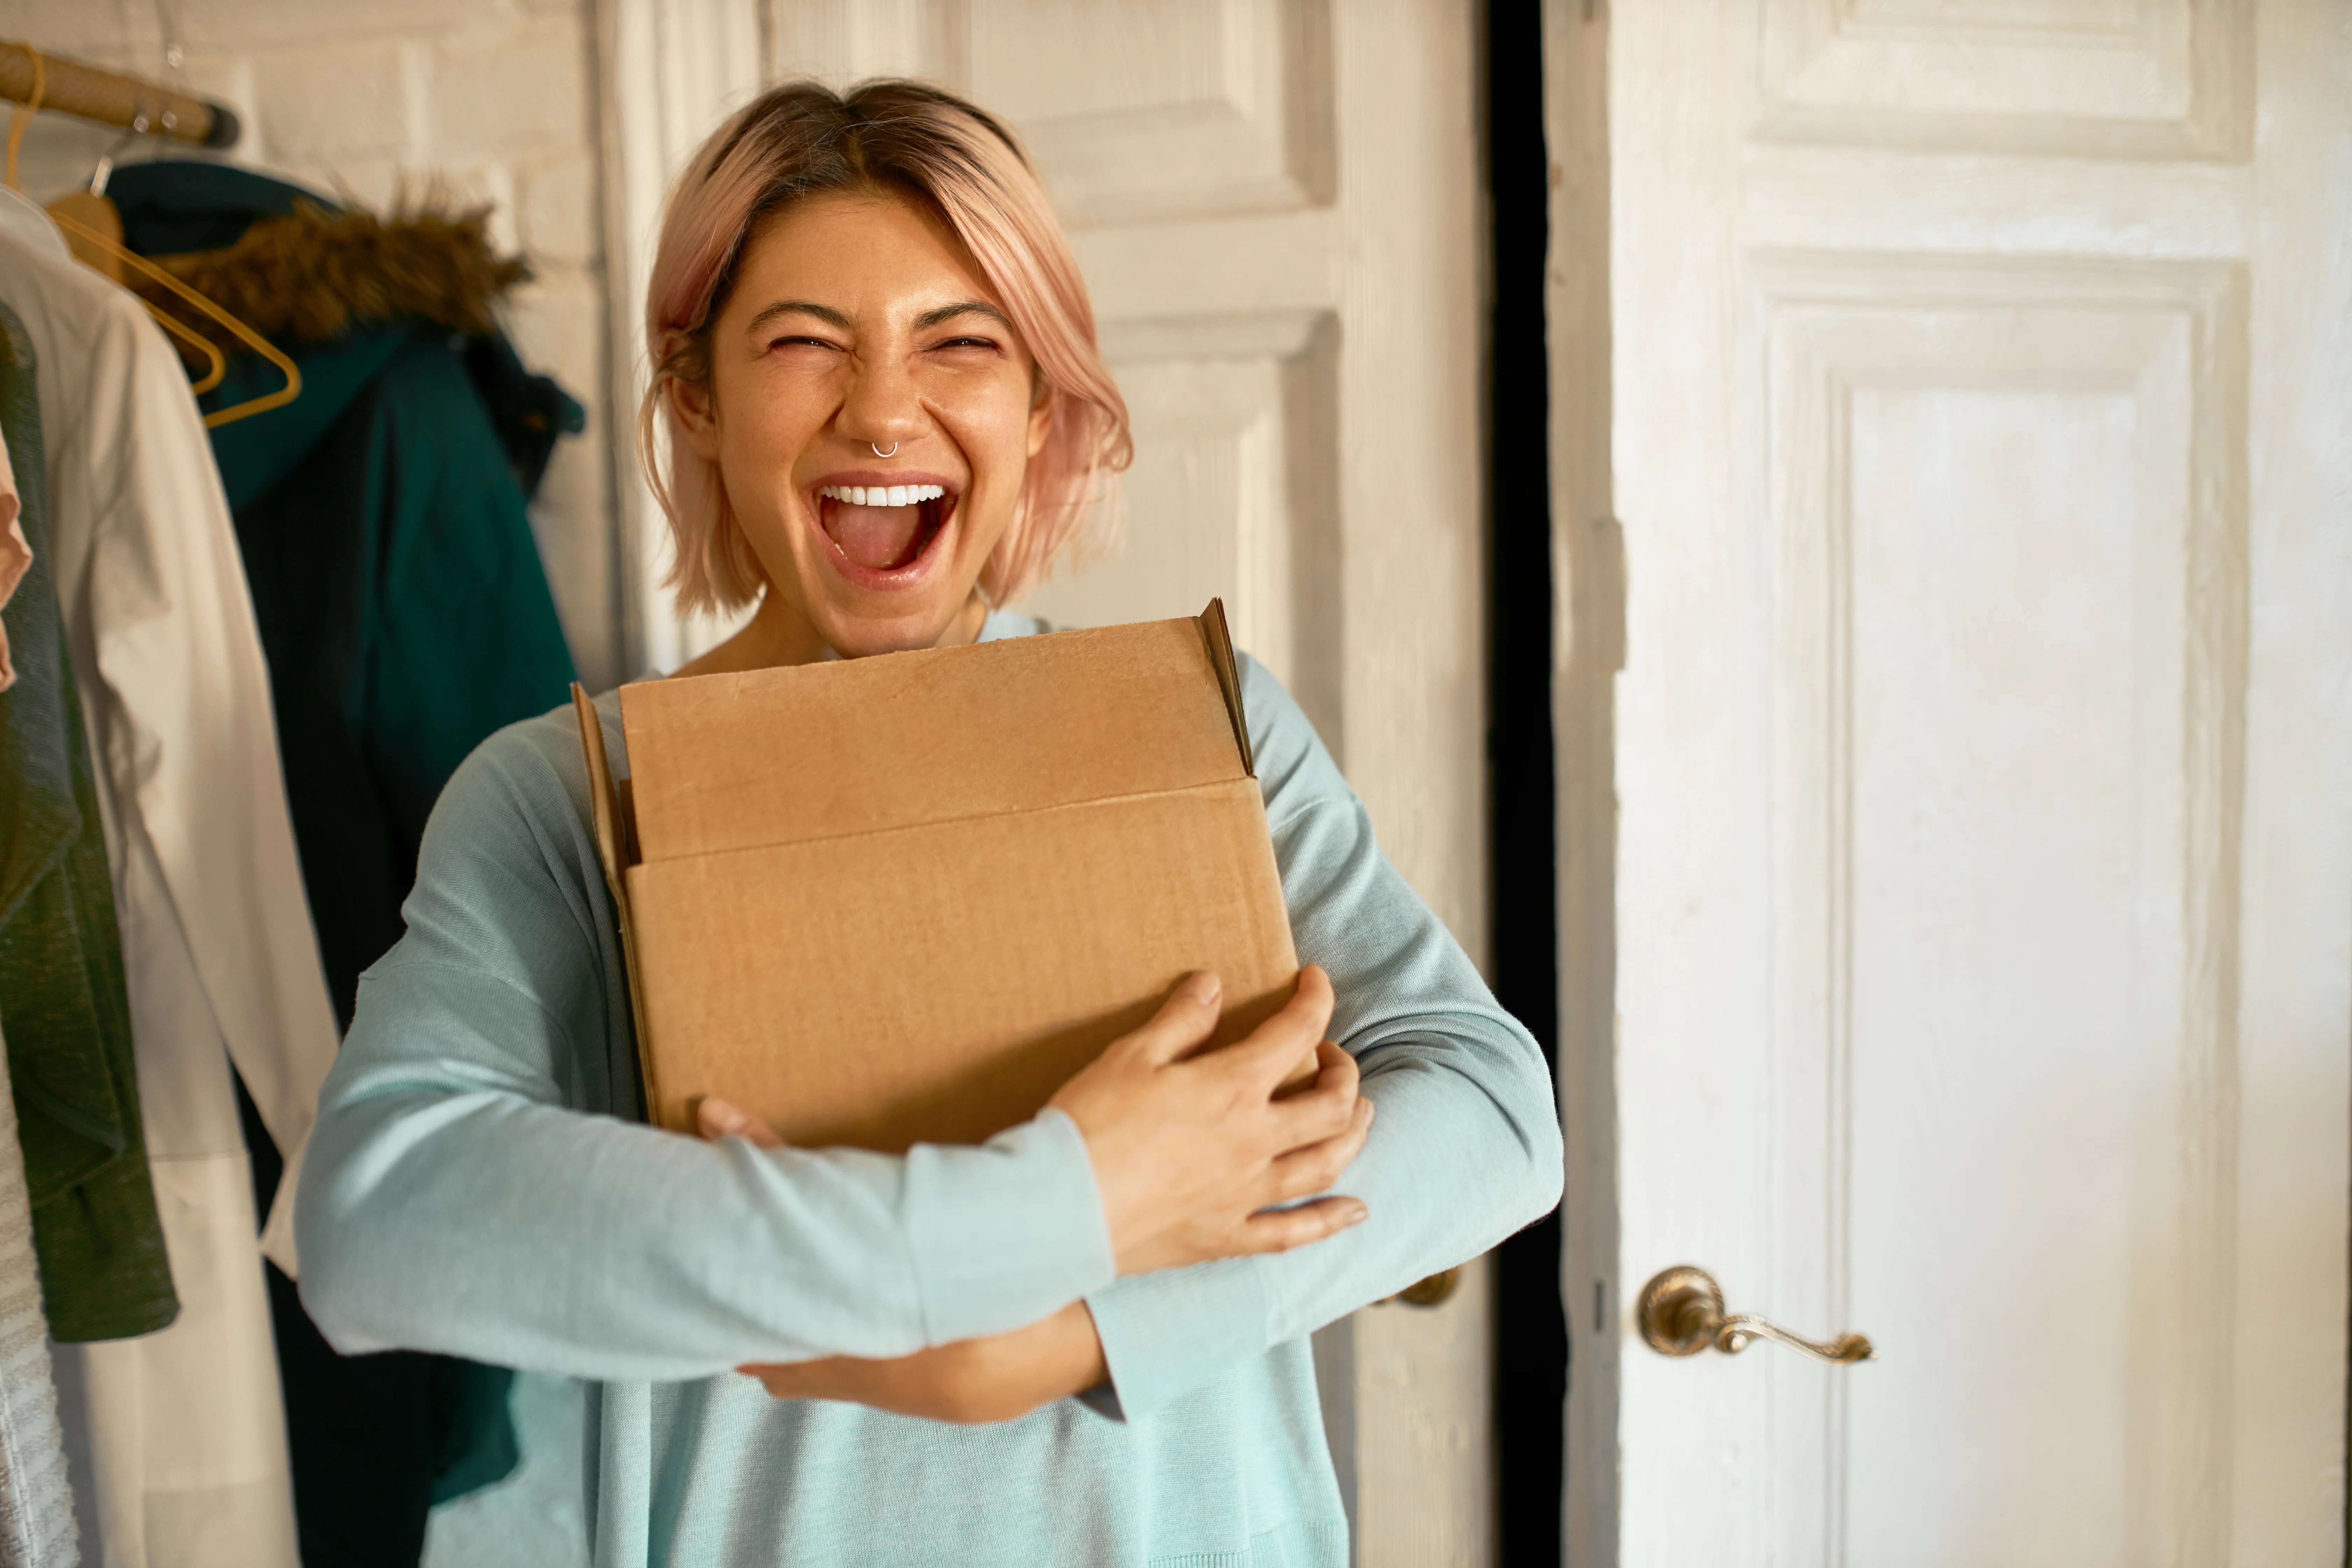 indoor-image-of-happy-cheerful-young-woman-holding-cardboard-box-delivered-to-her-apartment-expressing-excitement-going-to-unpack-parcel